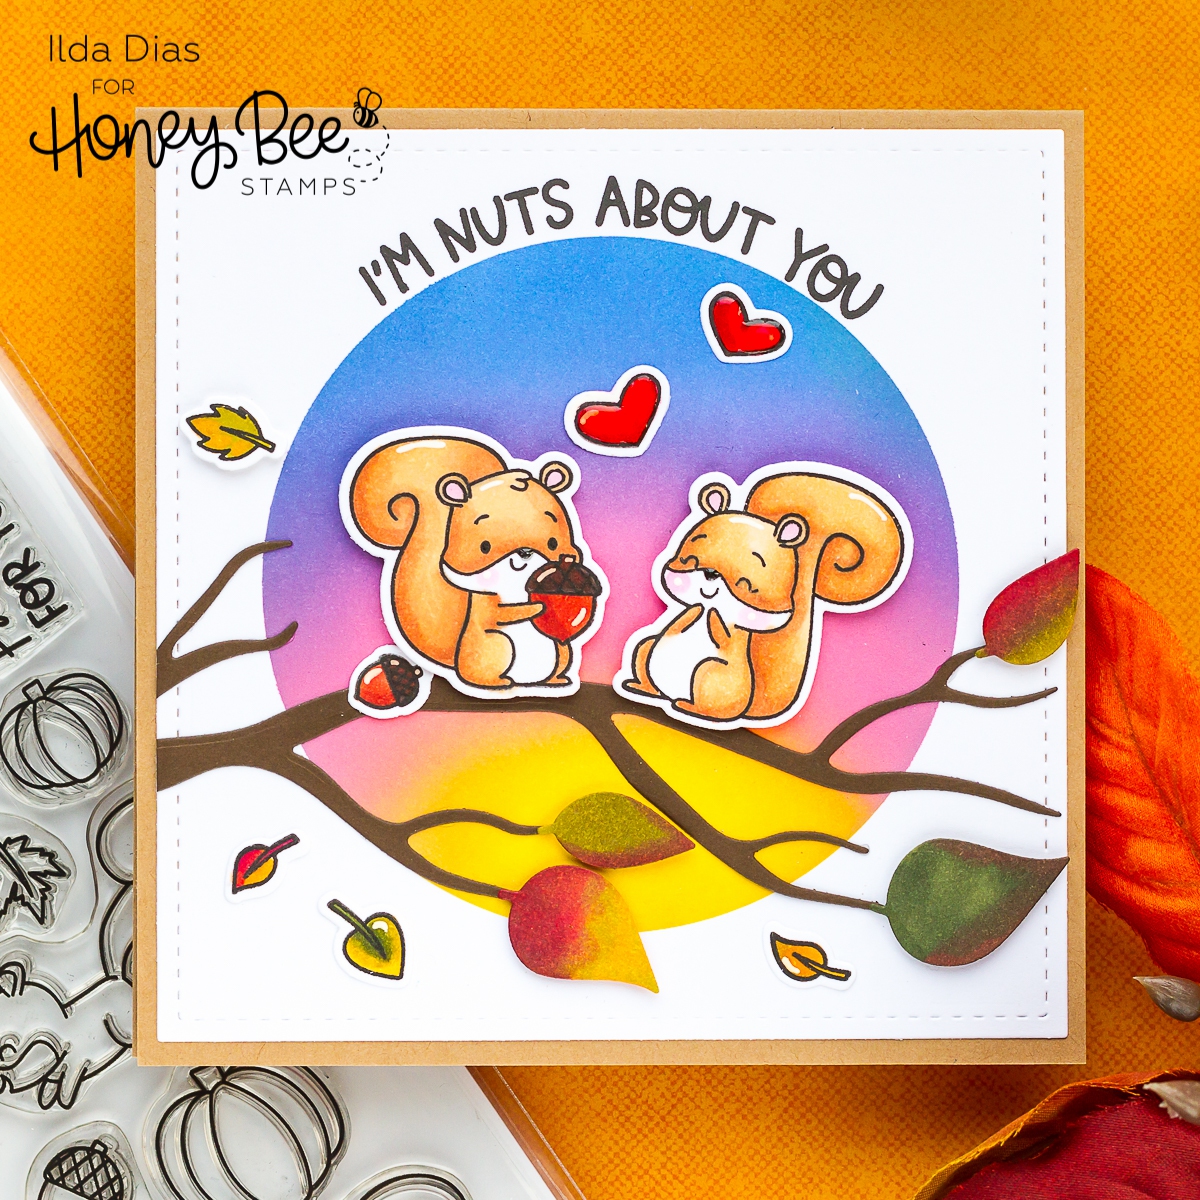 Nuts About You,Fall Scene Card,circle spotlight stencil,card making,stamping,Die cutting,handmade card,ilovedoingallthingscrafty,Stamps,how to,Ink Blending,distress oxide inks,Autumn Afternoon Release,